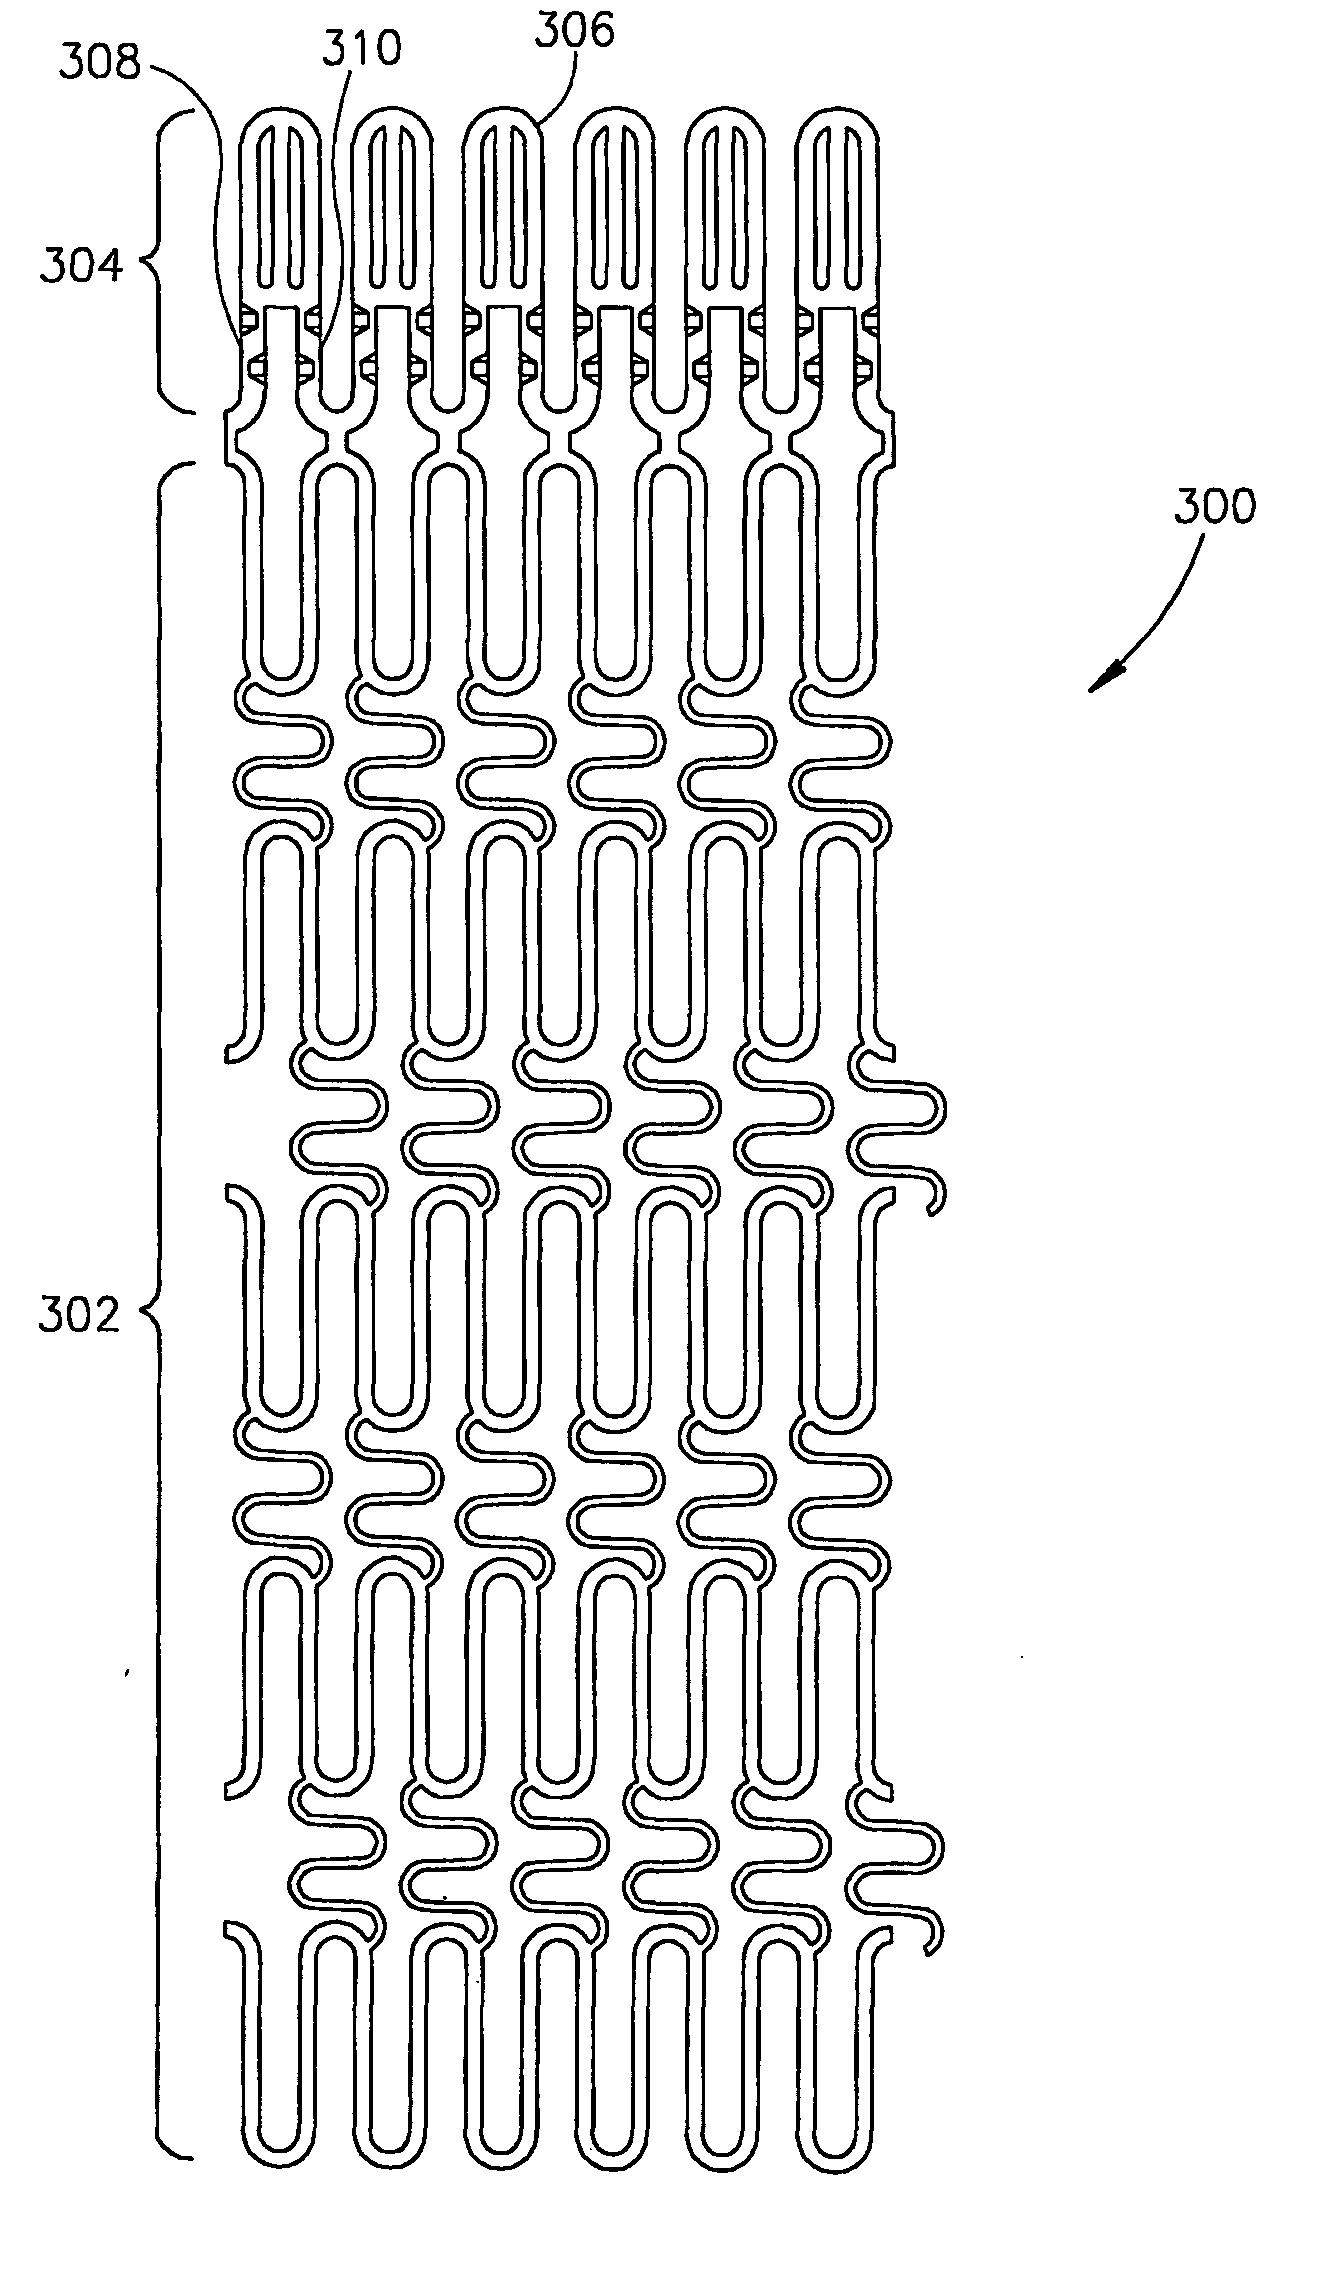 Mechanical structures and implants using said structures